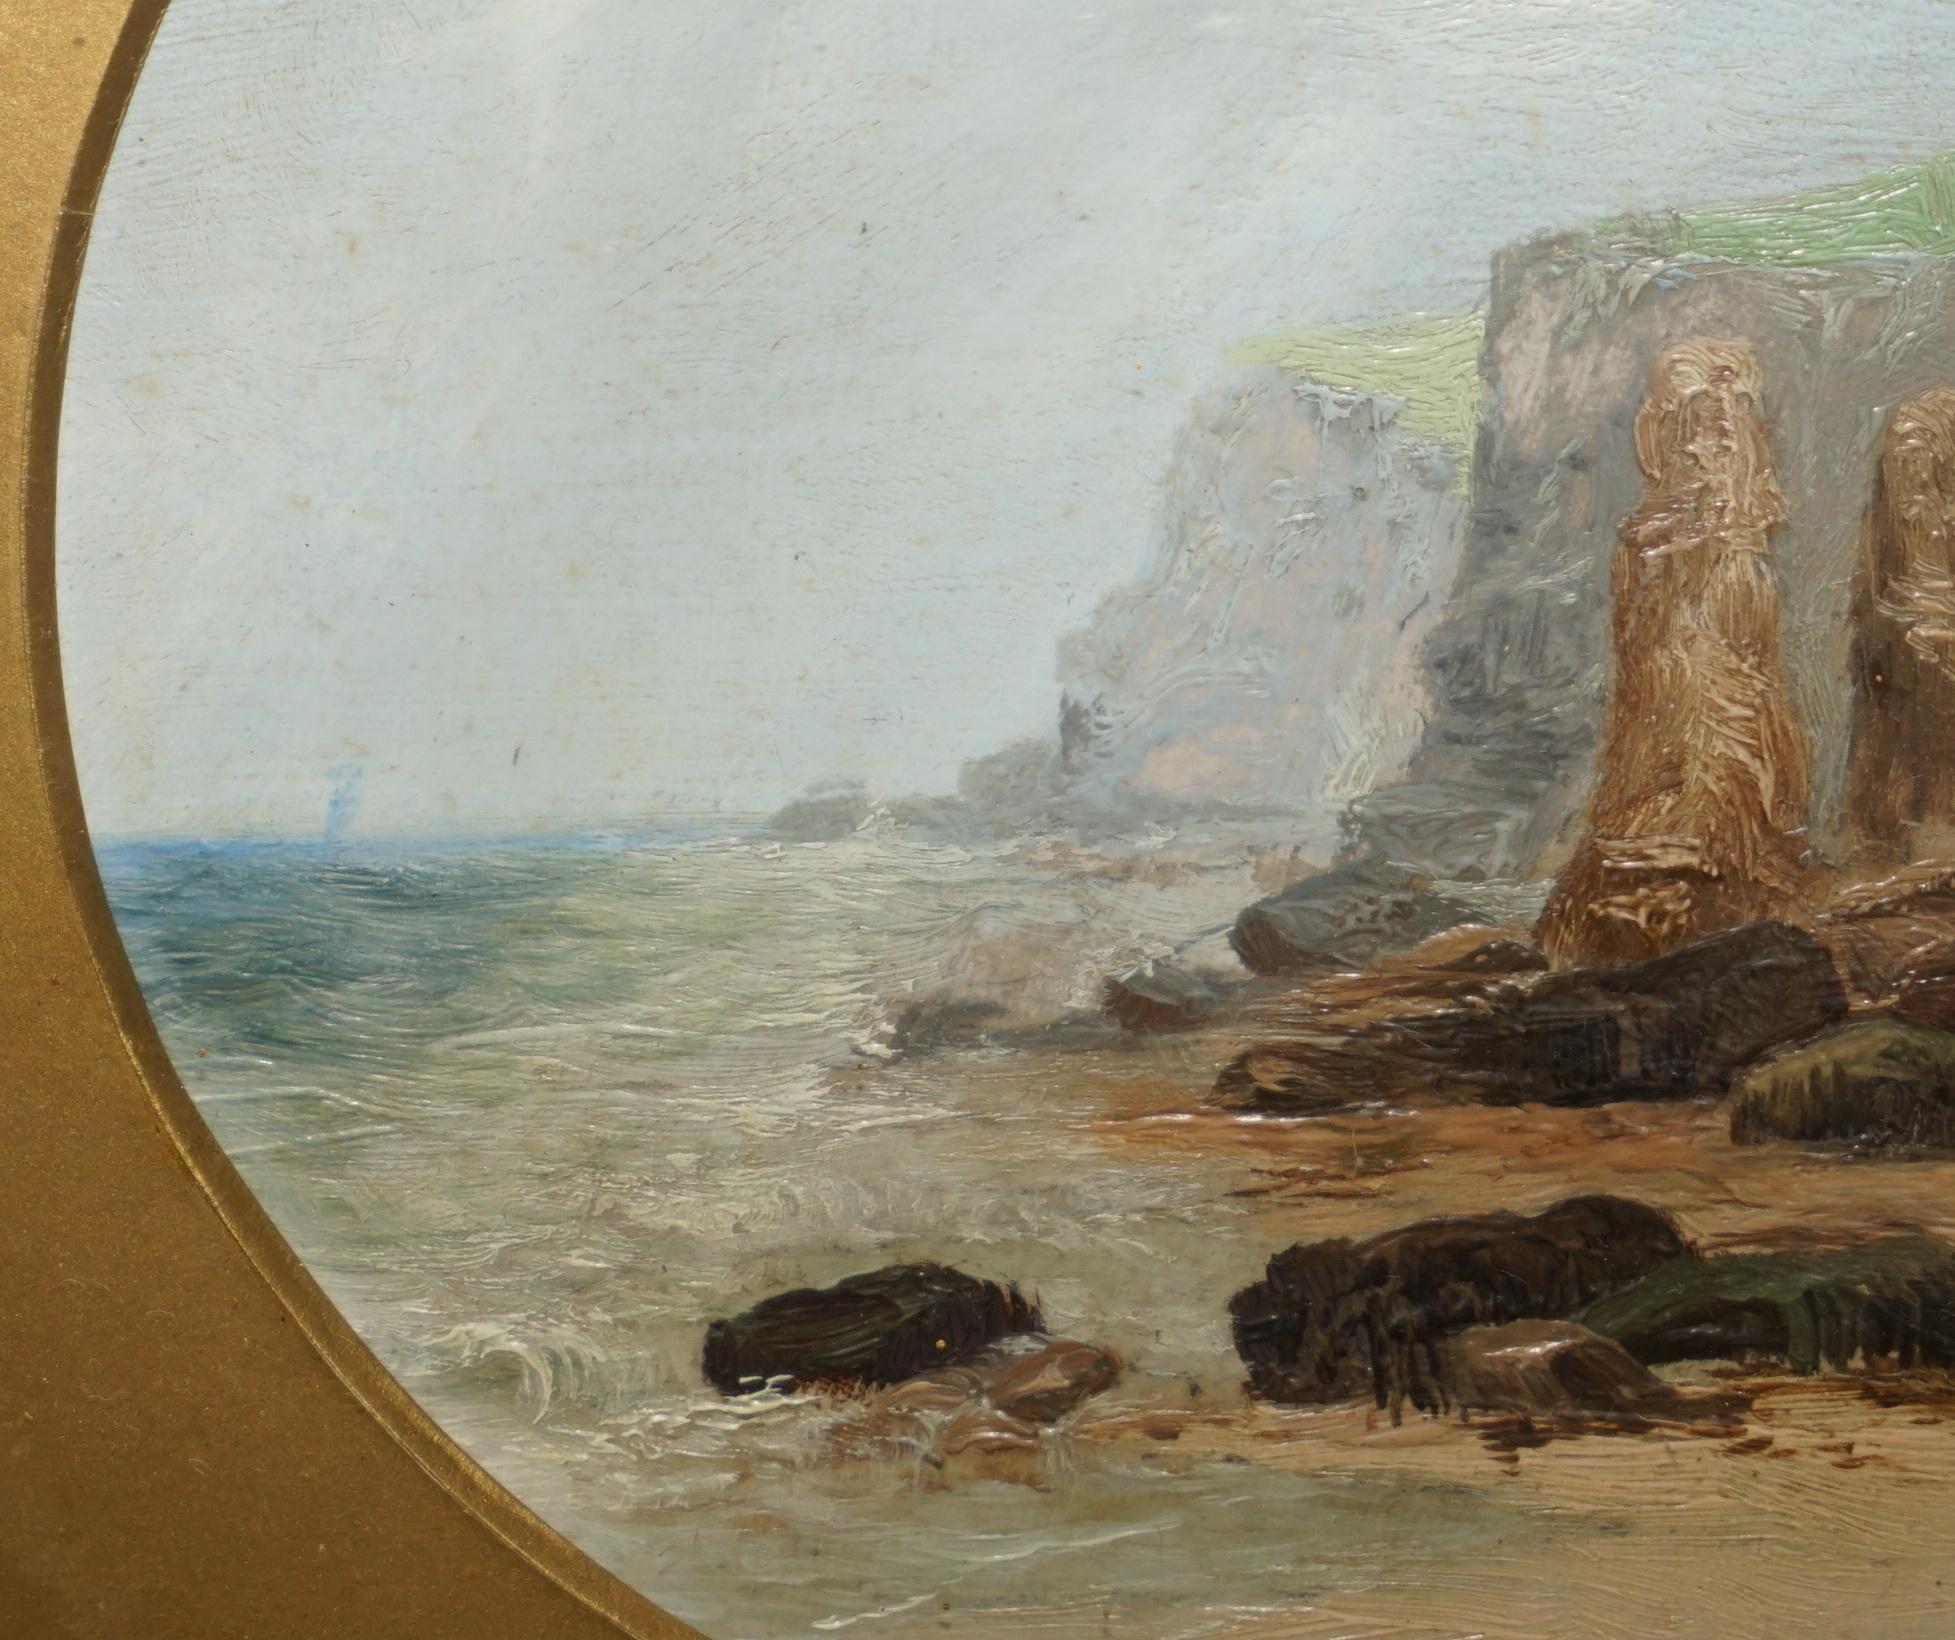 Hand-Painted EXQUISITE A J STICKS SIGNED SMALL OIL PAINTING FRAME BY S L NIELSEN SEA & CLIFFs For Sale